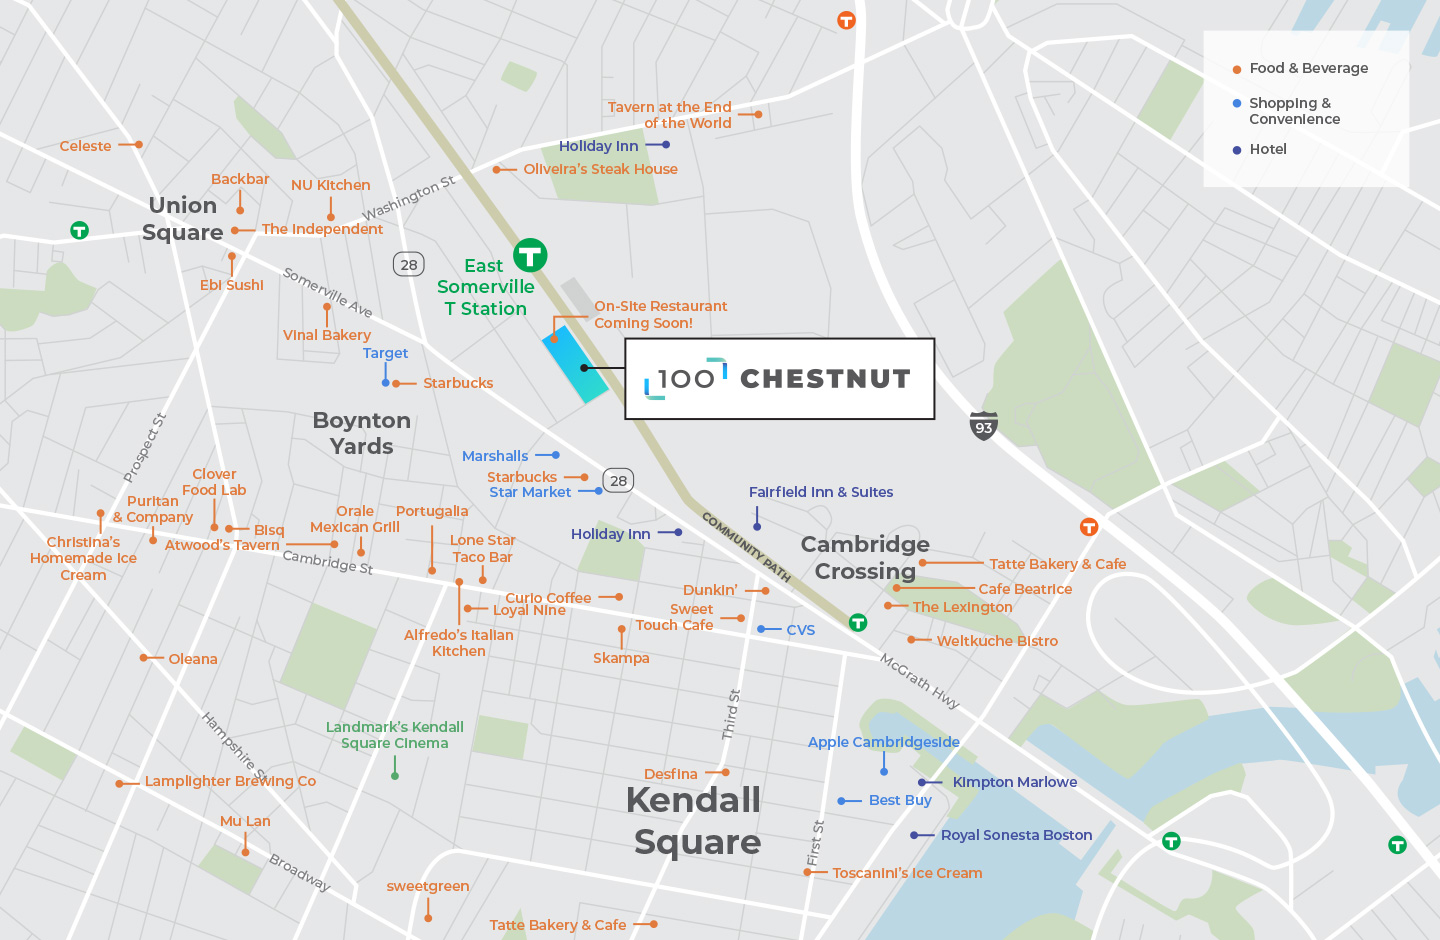 A map of the area around 100 Chesnut highlighting local businesses including restaurants, cafes, stores, and hotels in Union Square, Boynton Yards, Cambridge Crossing, and Kendall Square.